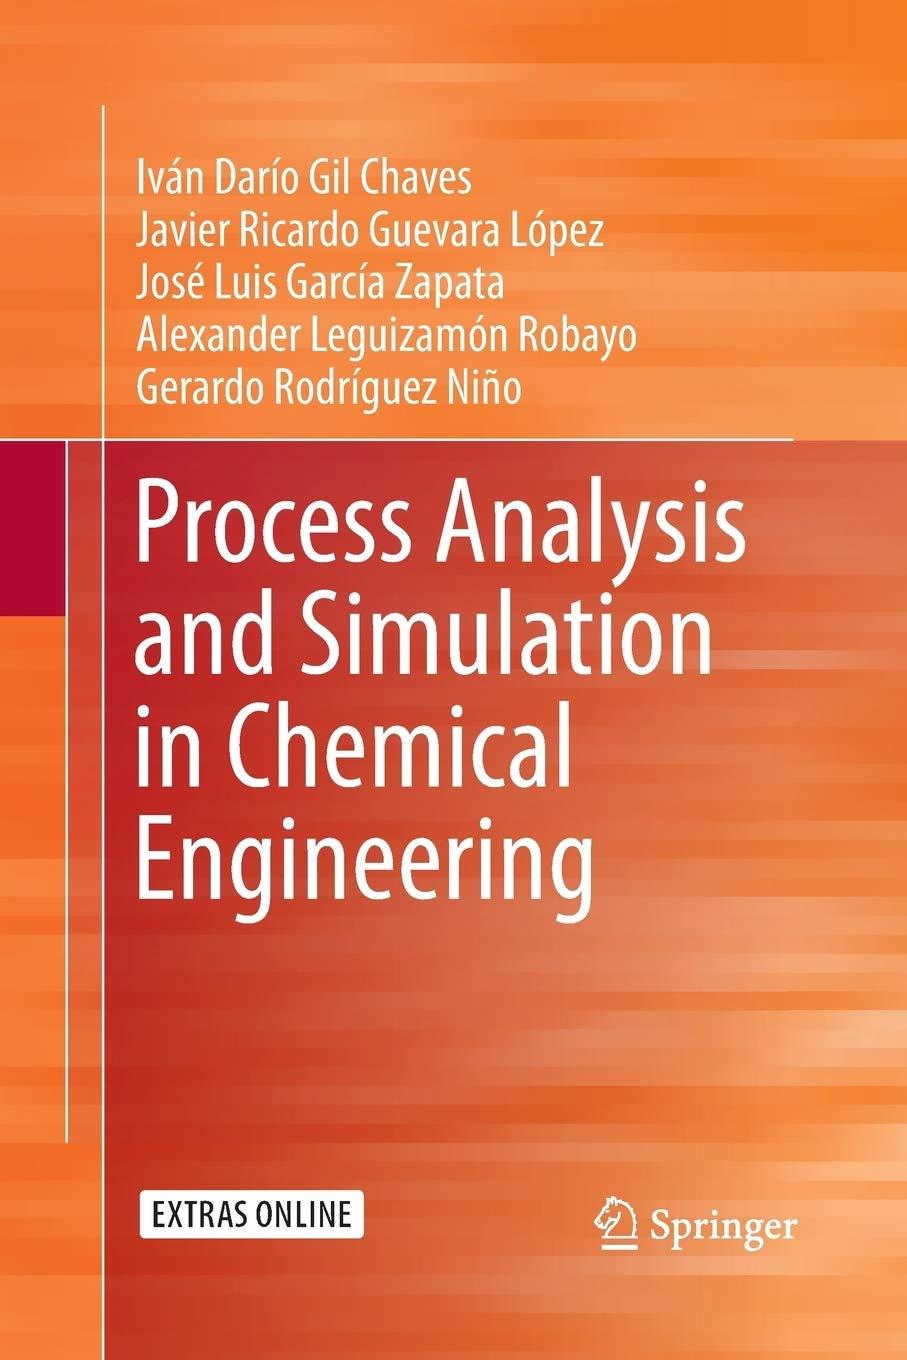 process analysis and simulation in chemical engineering 2016 edition iván darío gil chaves, javier ricardo